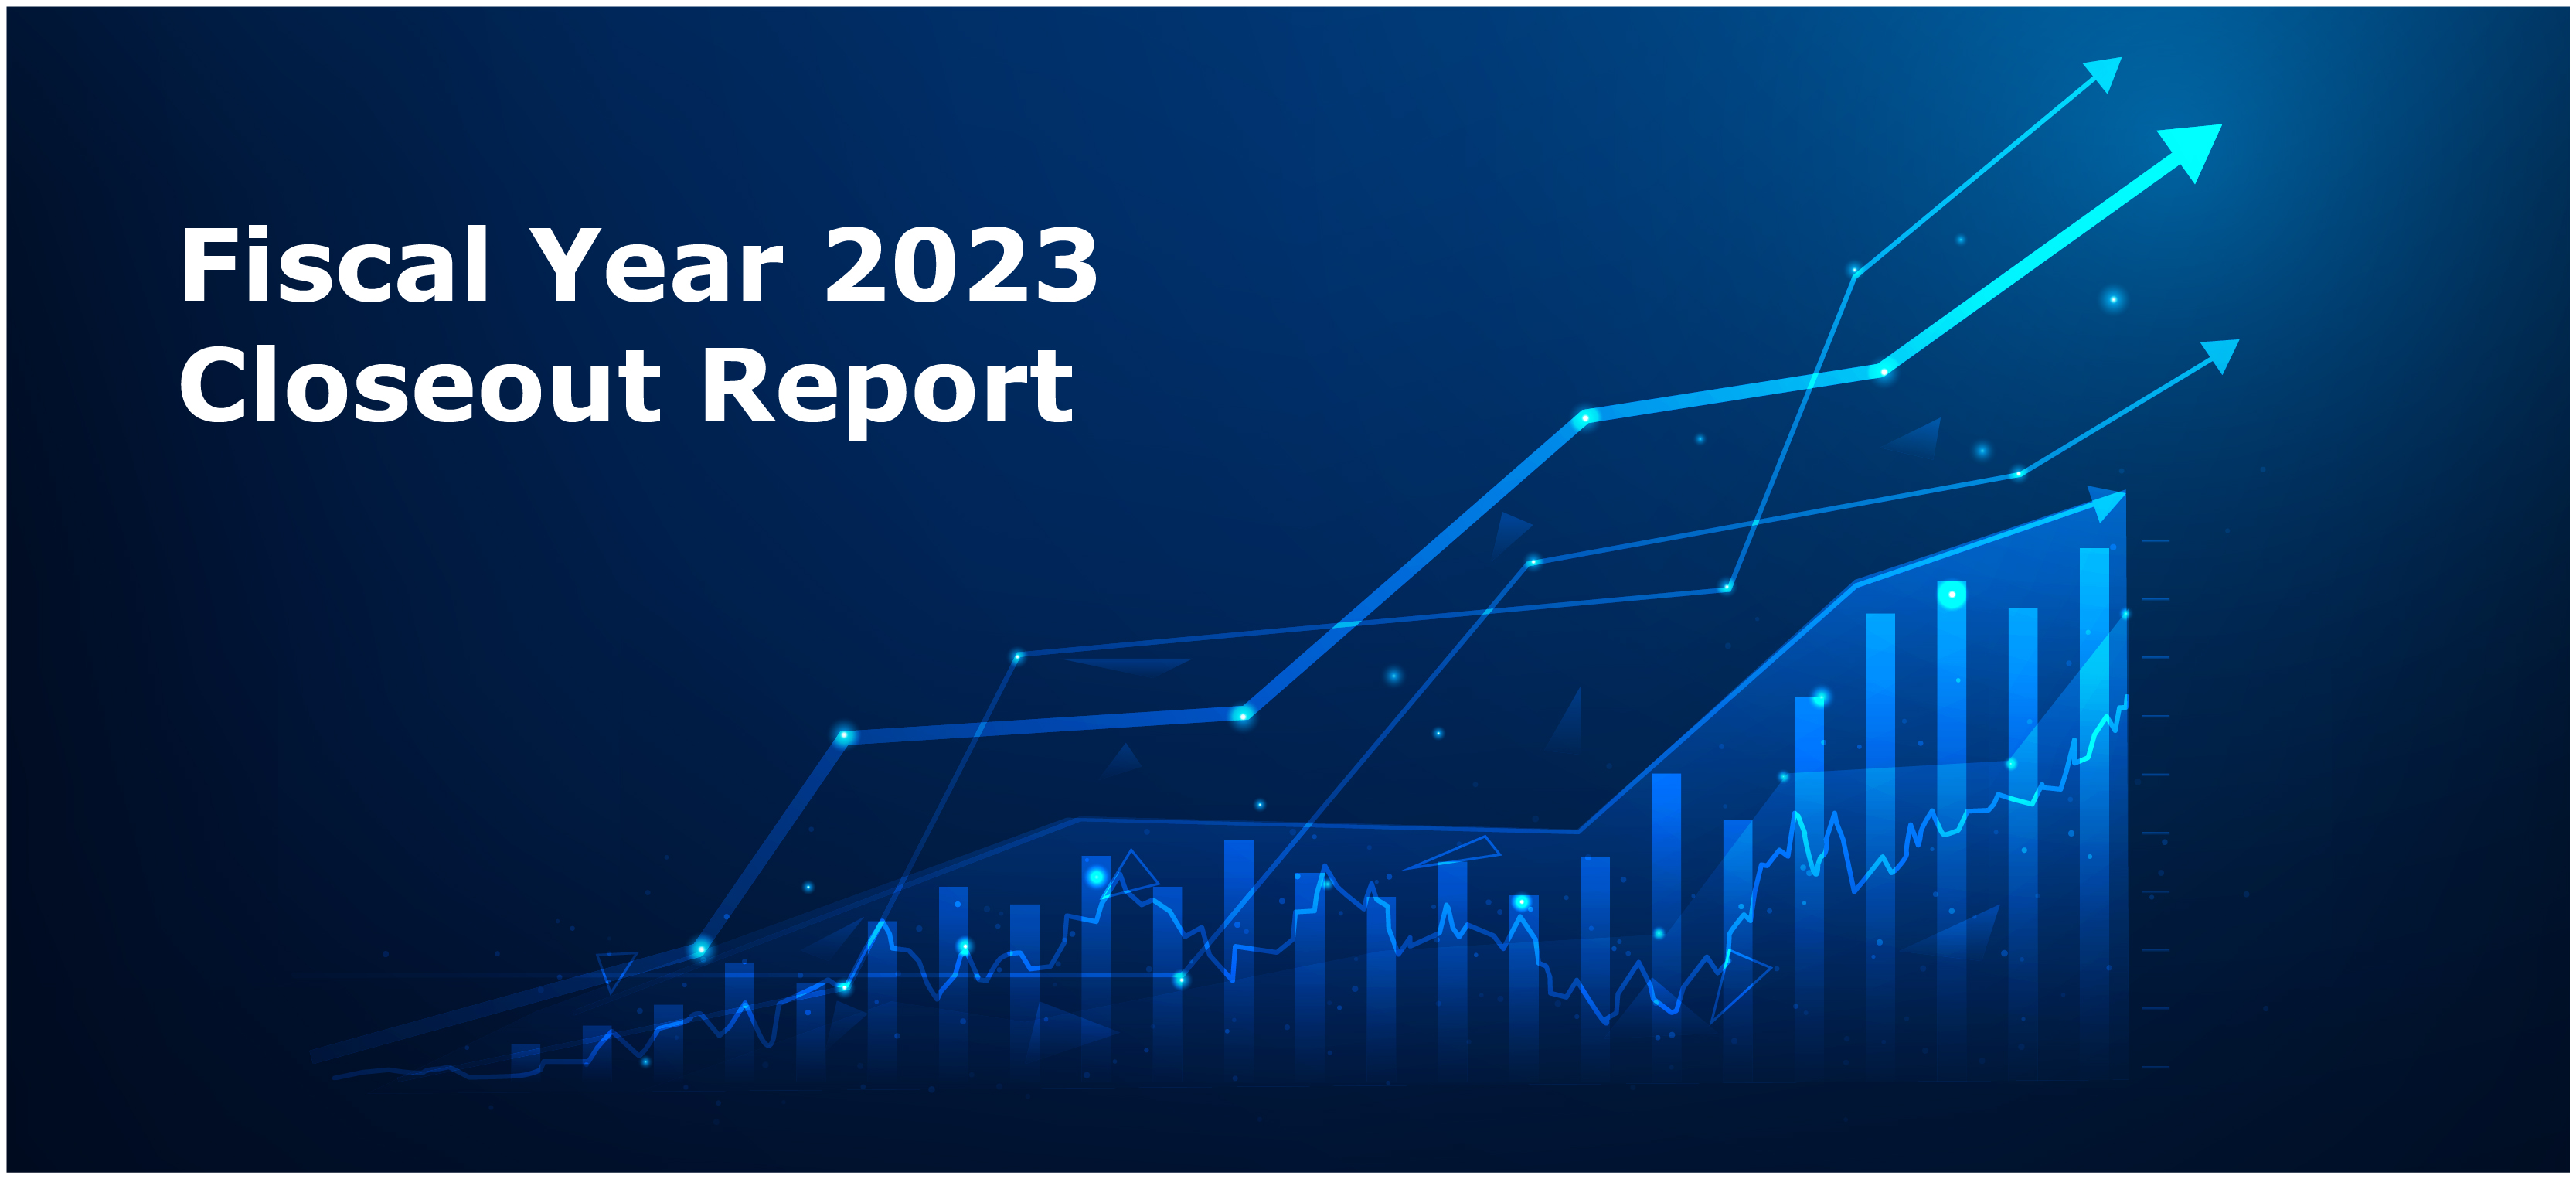 Fiscal Year 2023 Closeout Report